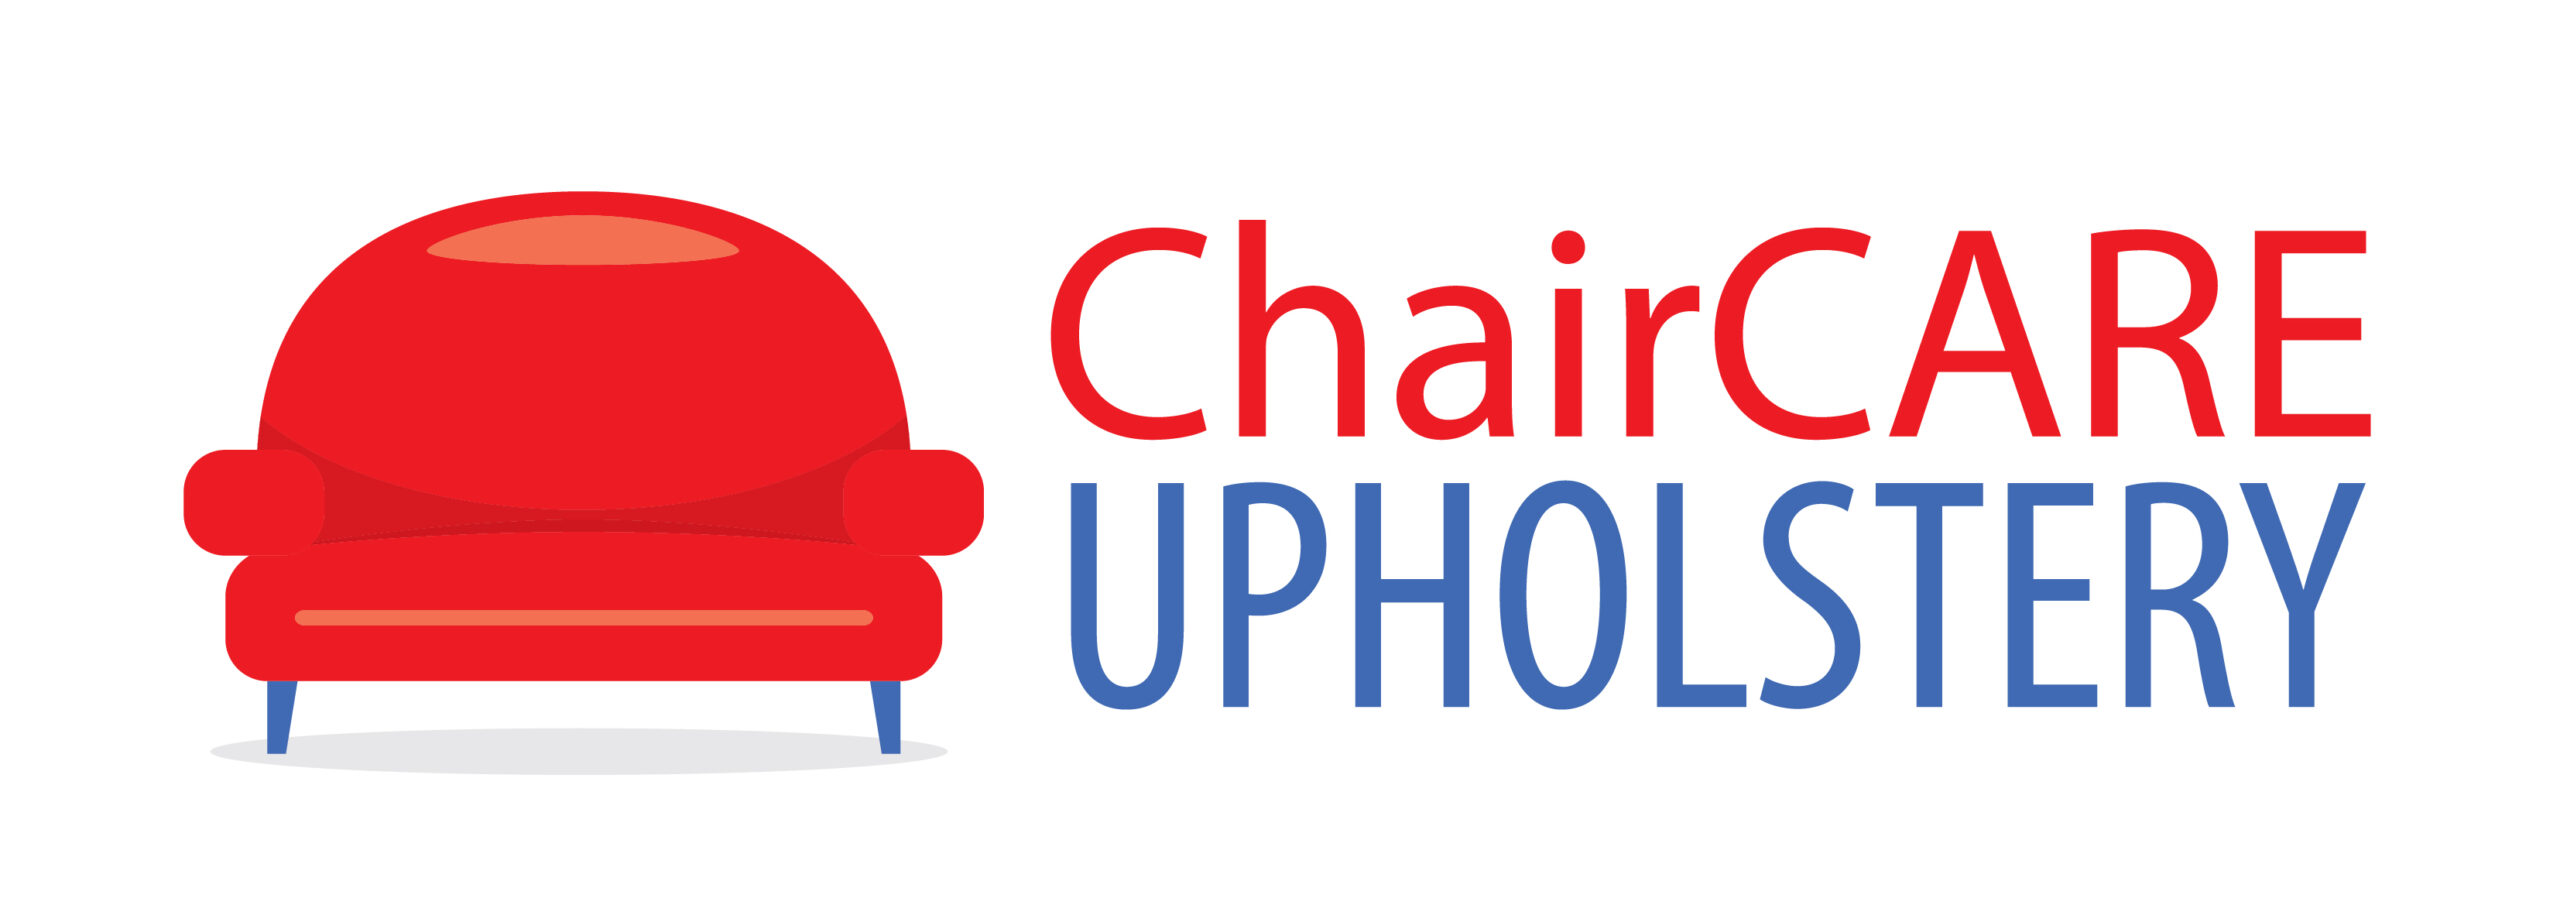 Chair Care Upholstery